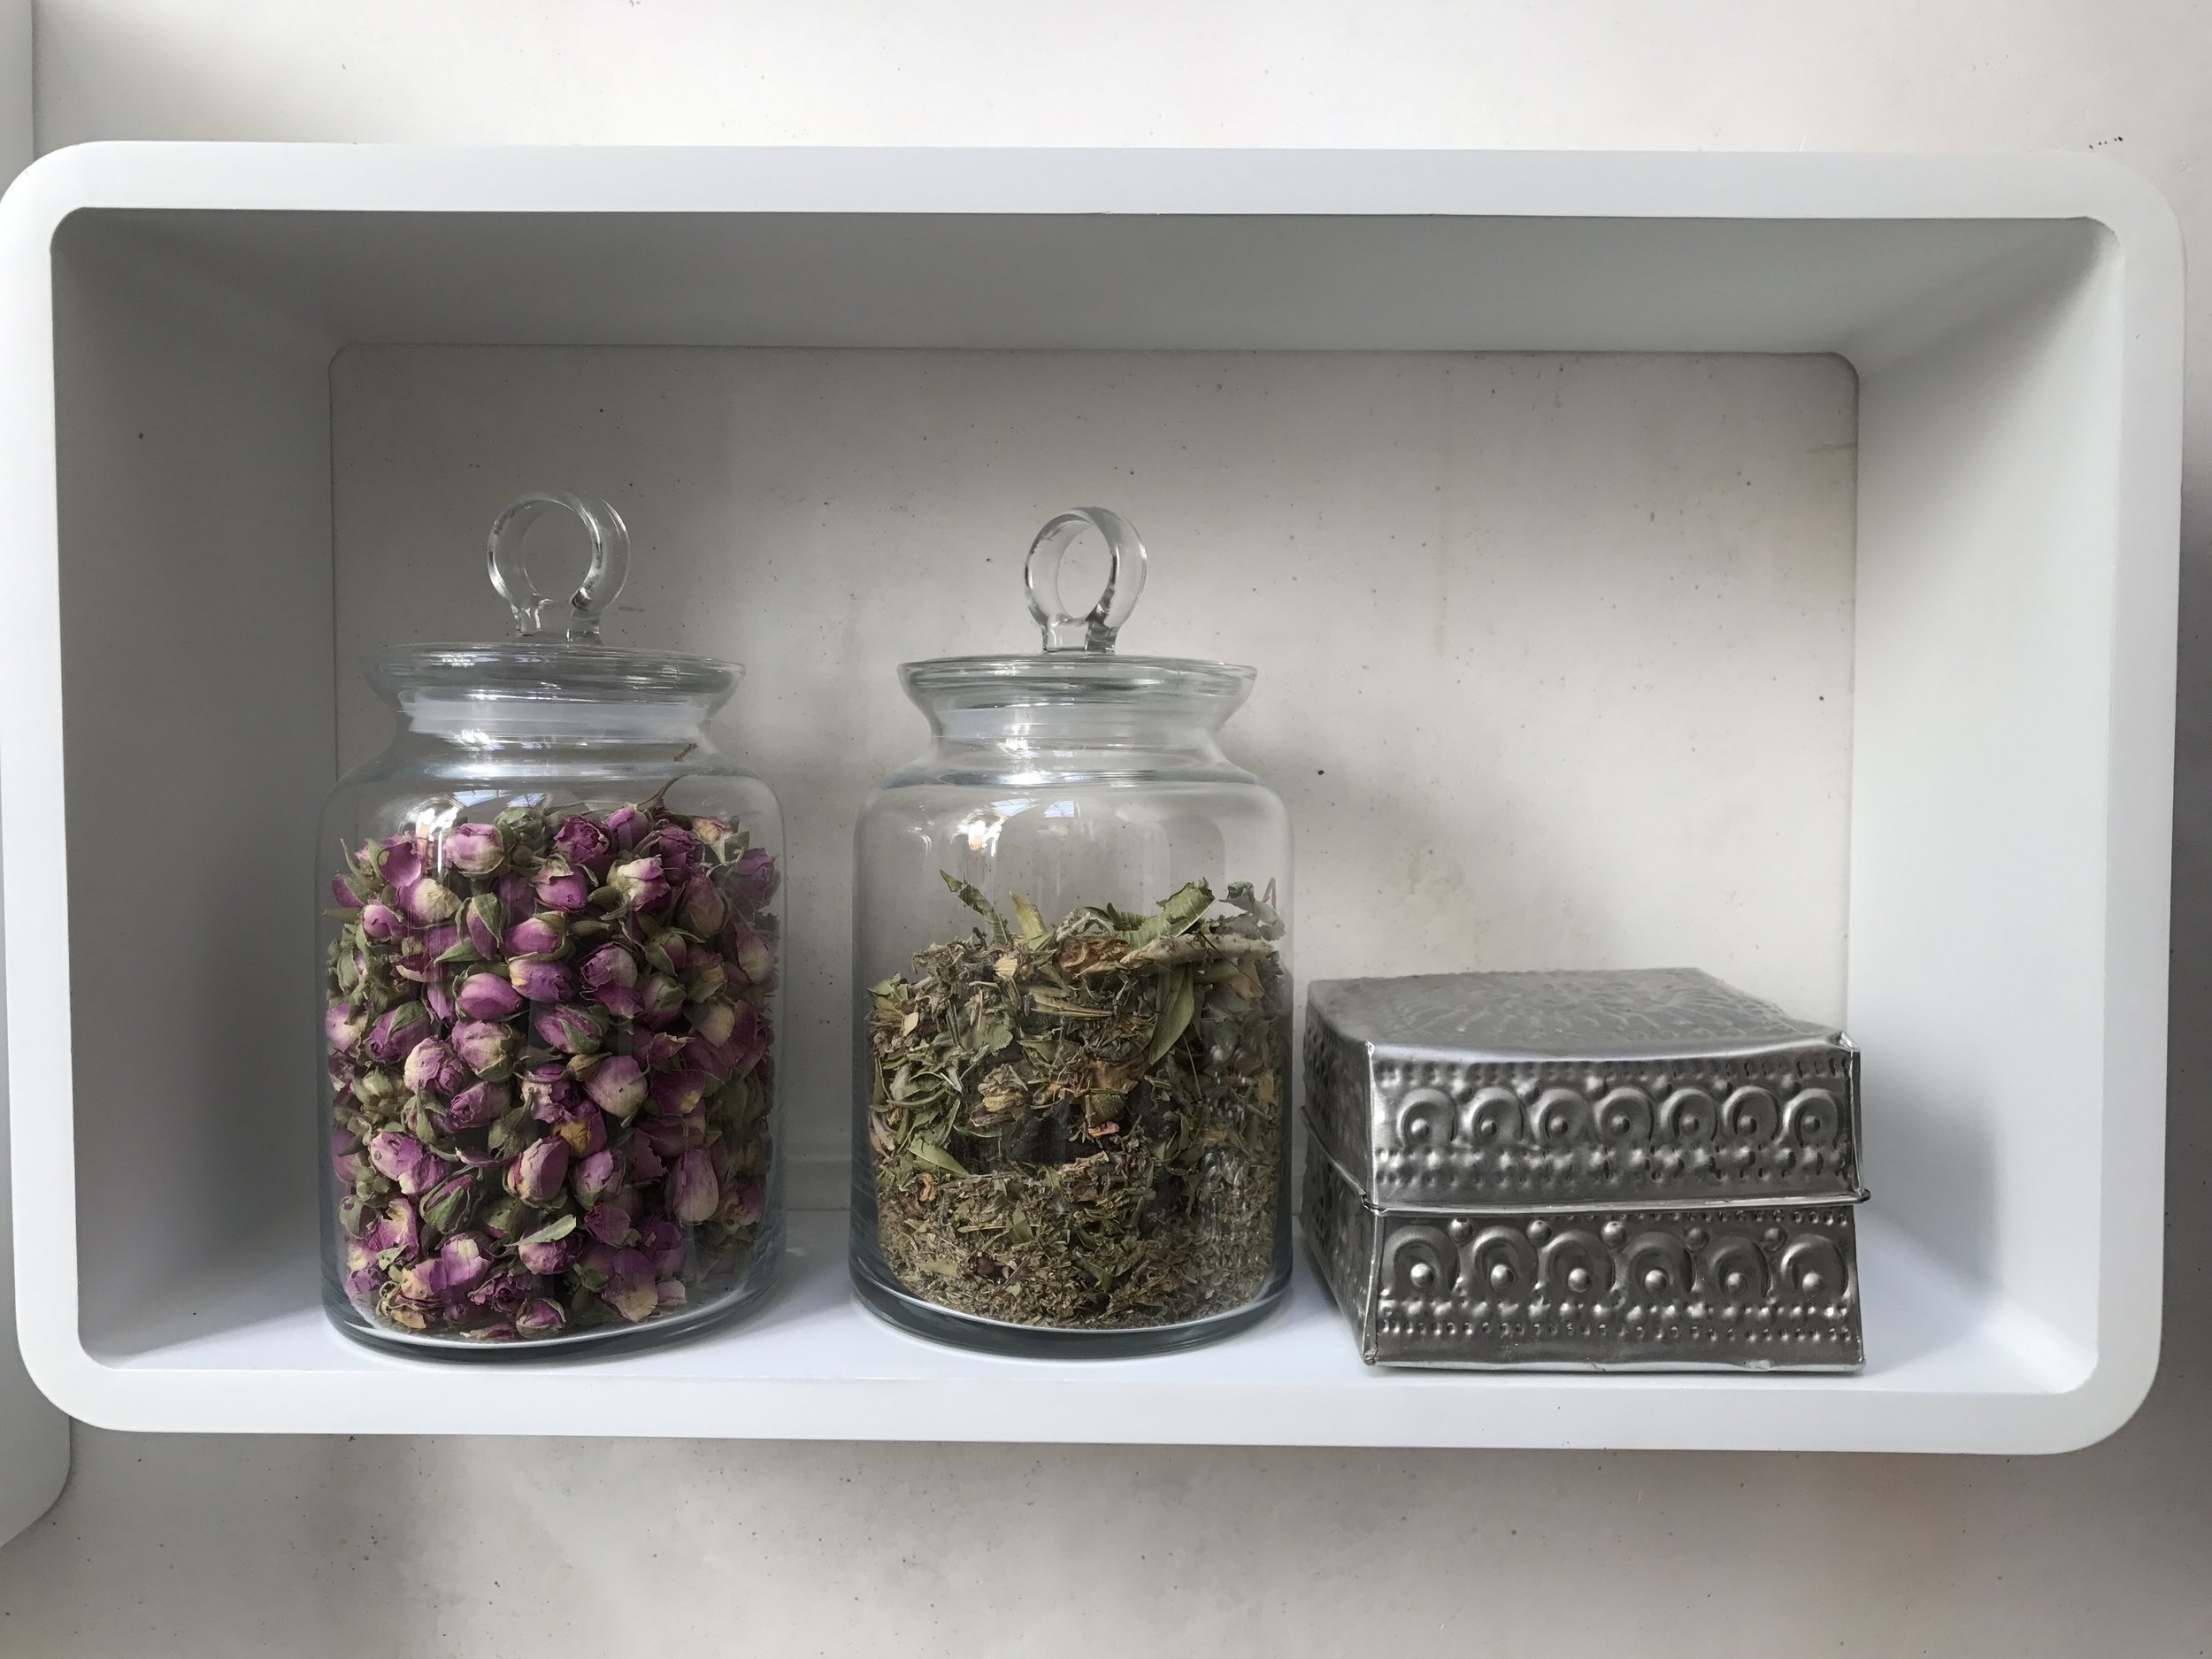 Dried Roses and Berber Tea (mix of several plants)